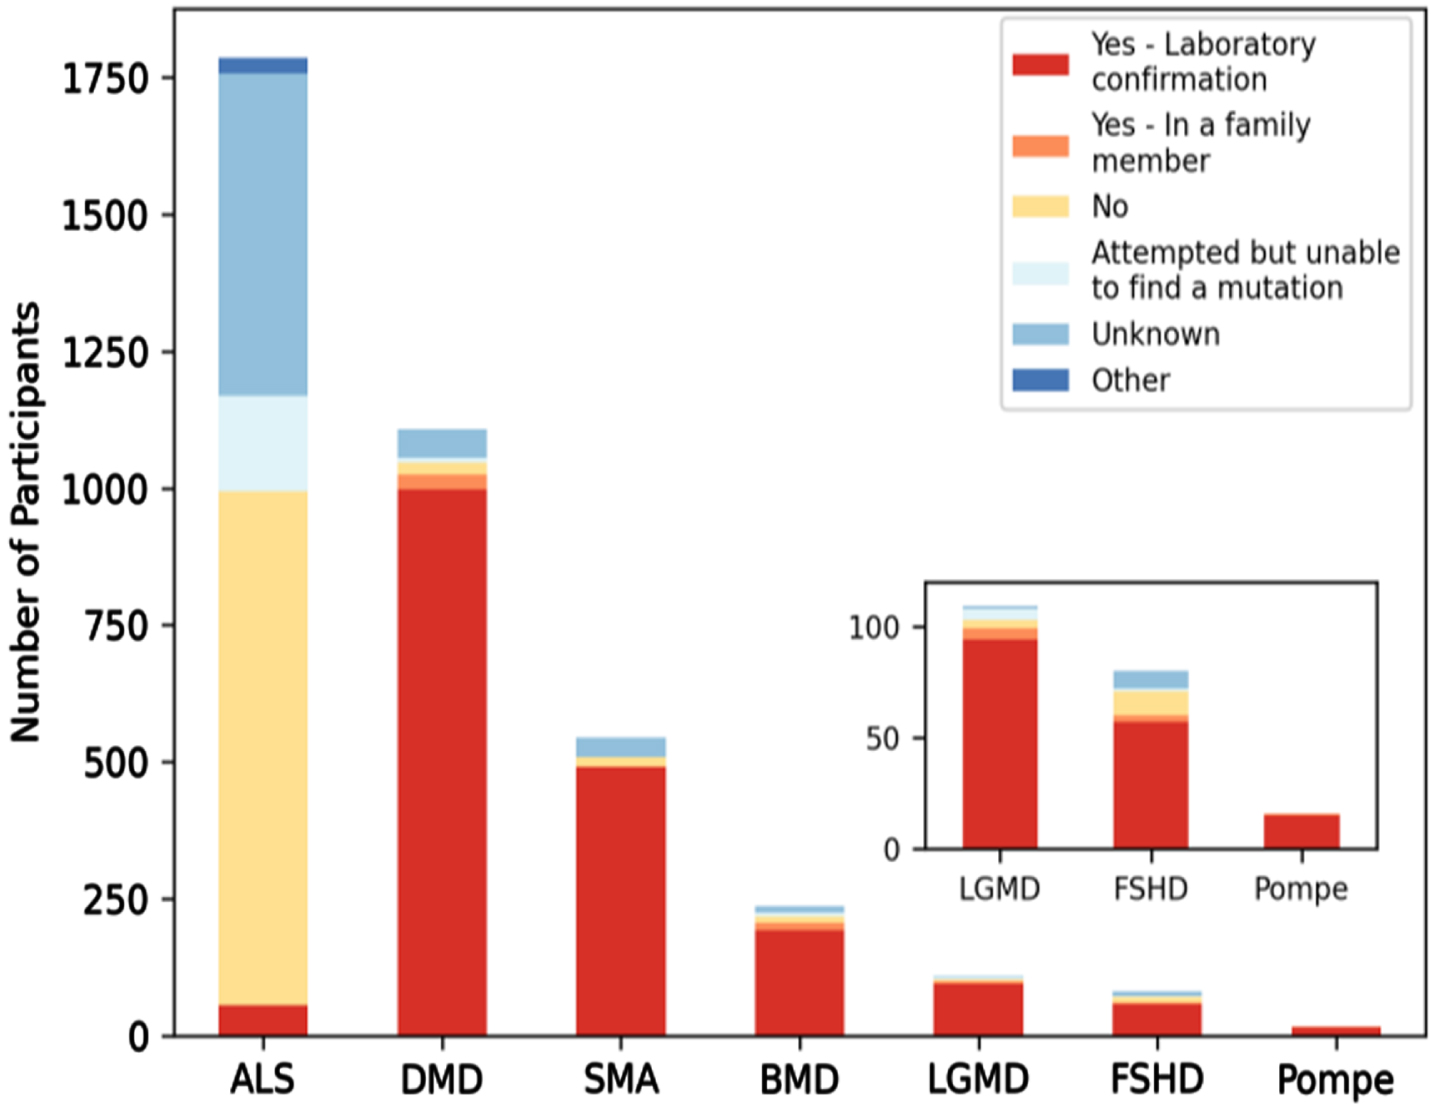 The majority of MOVR participants have a confirmed laboratory genetic diagnosis. Six of the 7 indications in MOVR are caused by a genetic mutation with the exception of ALS. Ninety percent of participants with DMD or SMA had a laboratory confirmed genetic diagnosis while 81% of participants with BMD, 71% with FSHD, 86% with LGMD, and 94% of those with Pompe disease have a laboratory confirmed genetic diagnosis. These percentages increase when including those participants who have an affected family member. For ALS, only 3% of participants of a confirmed laboratory diagnosis.